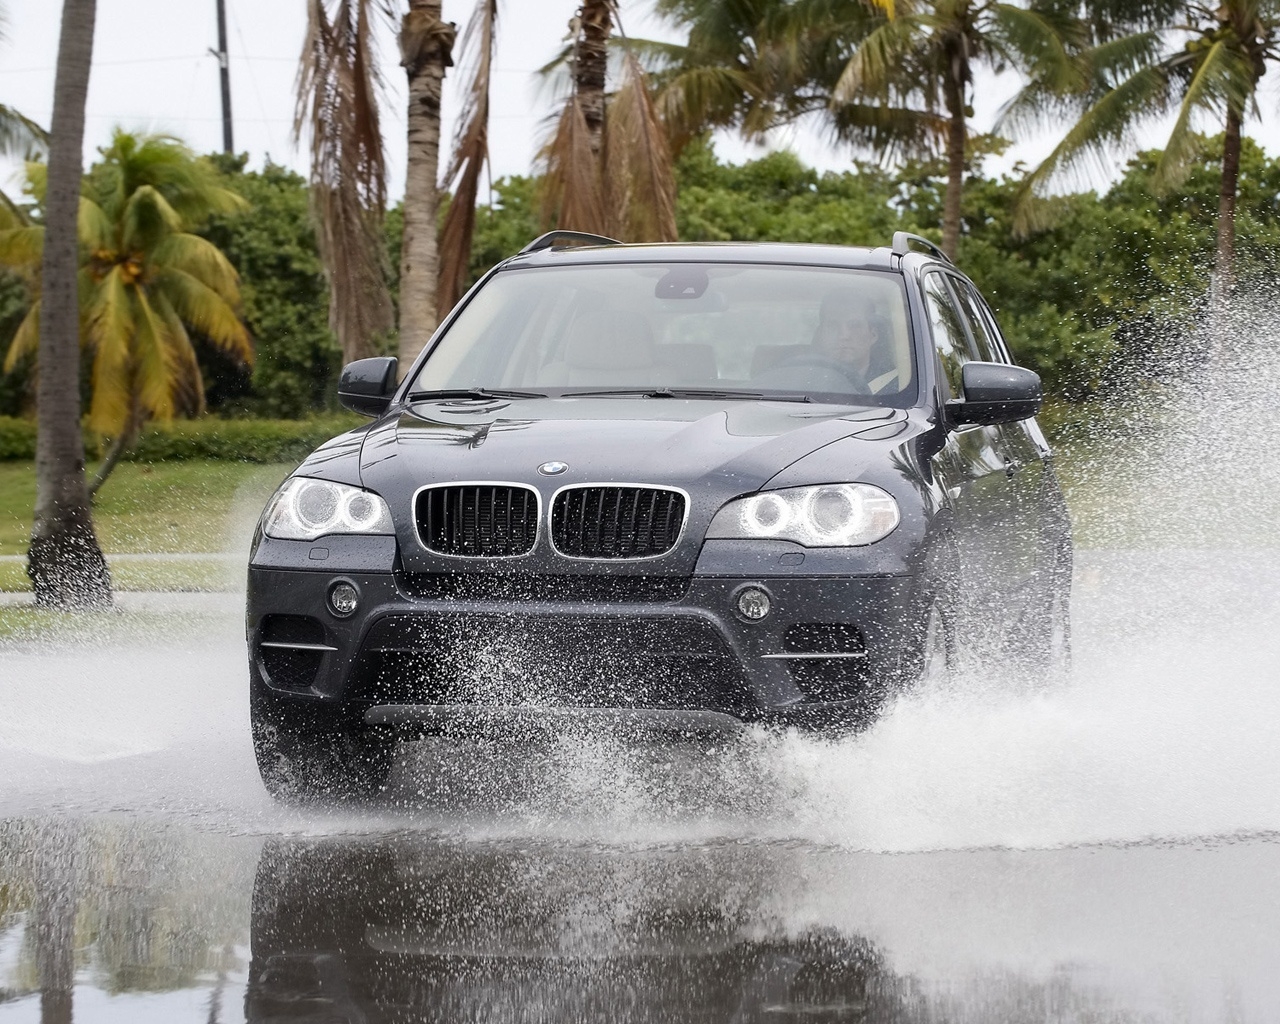 BMW X5 Water 2010 for 1280 x 1024 resolution